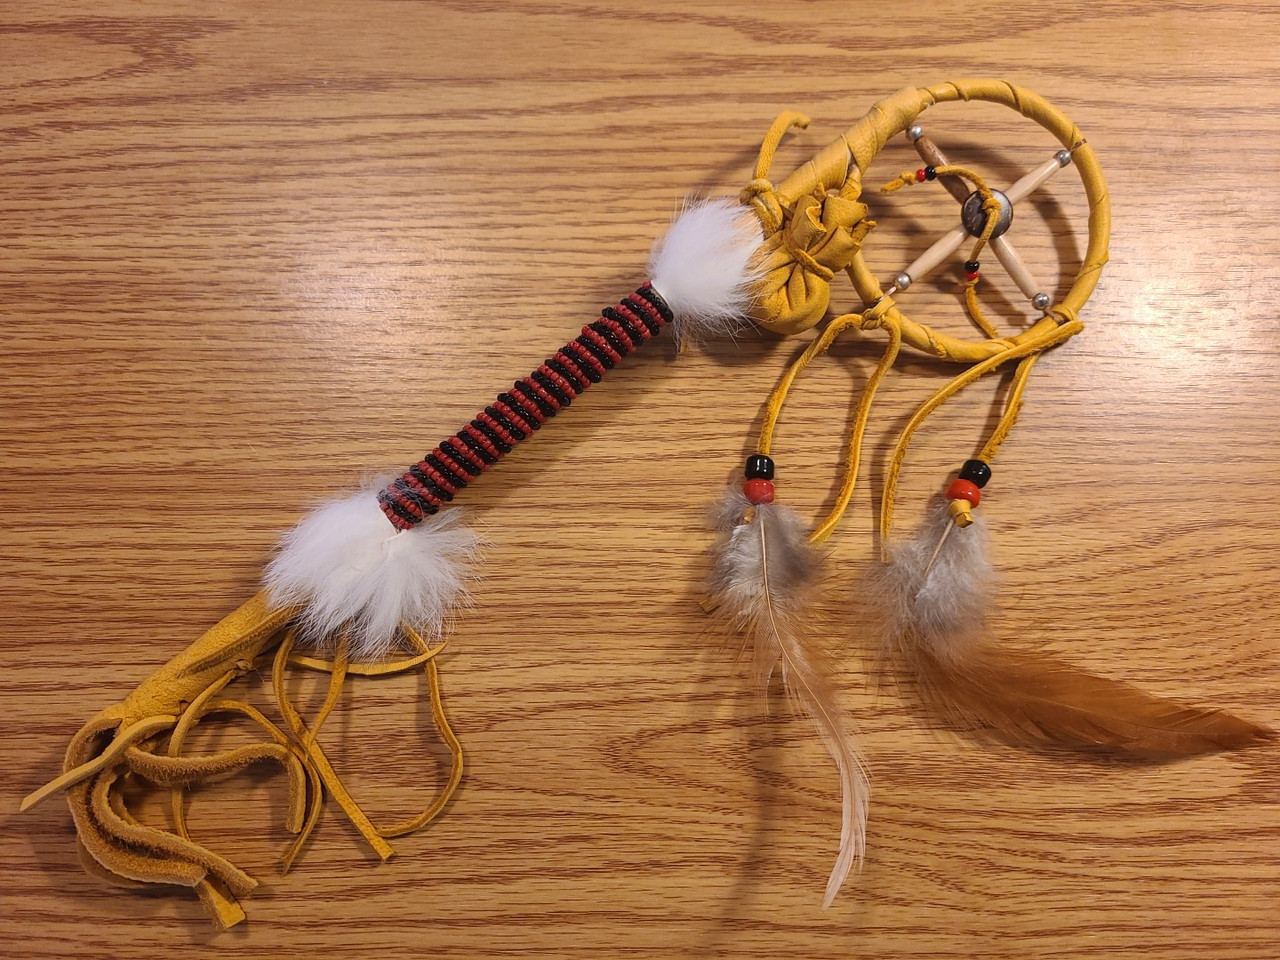 Make your own Talking Stick  Native american traditions, Native